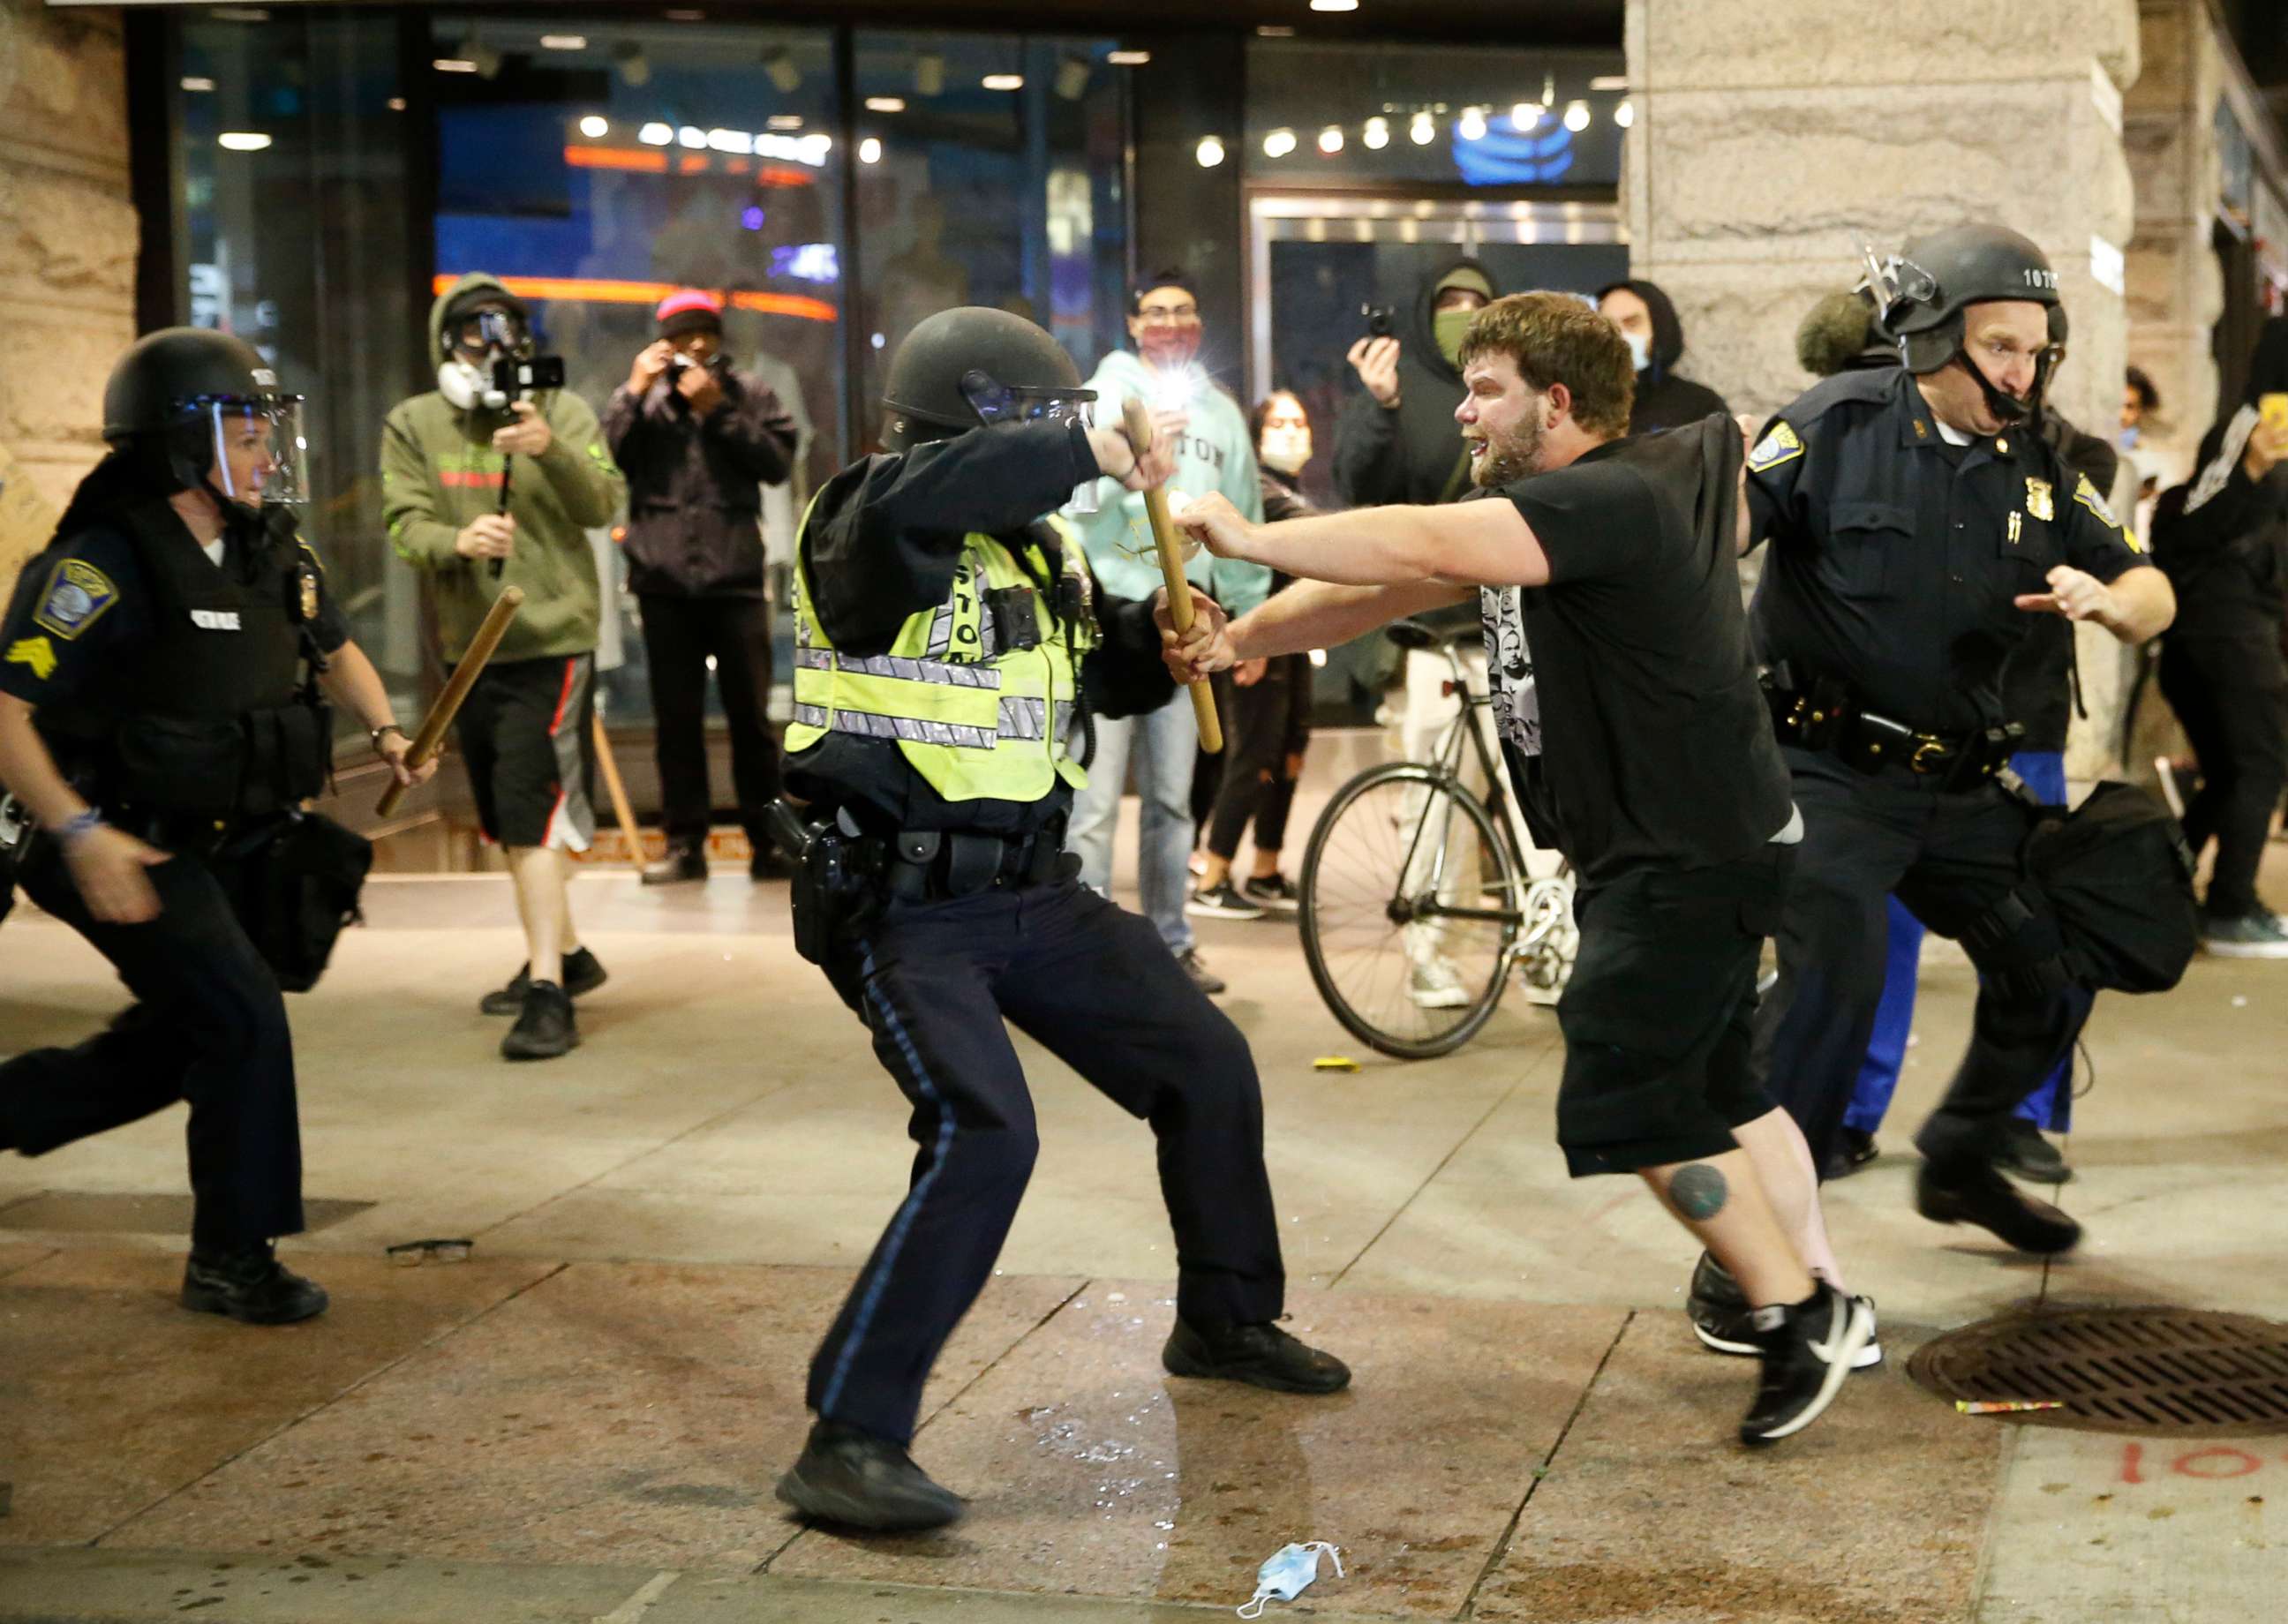 PHOTO: A man is arrested after tensions rose following a peaceful march in Boston, May 31, 2020.